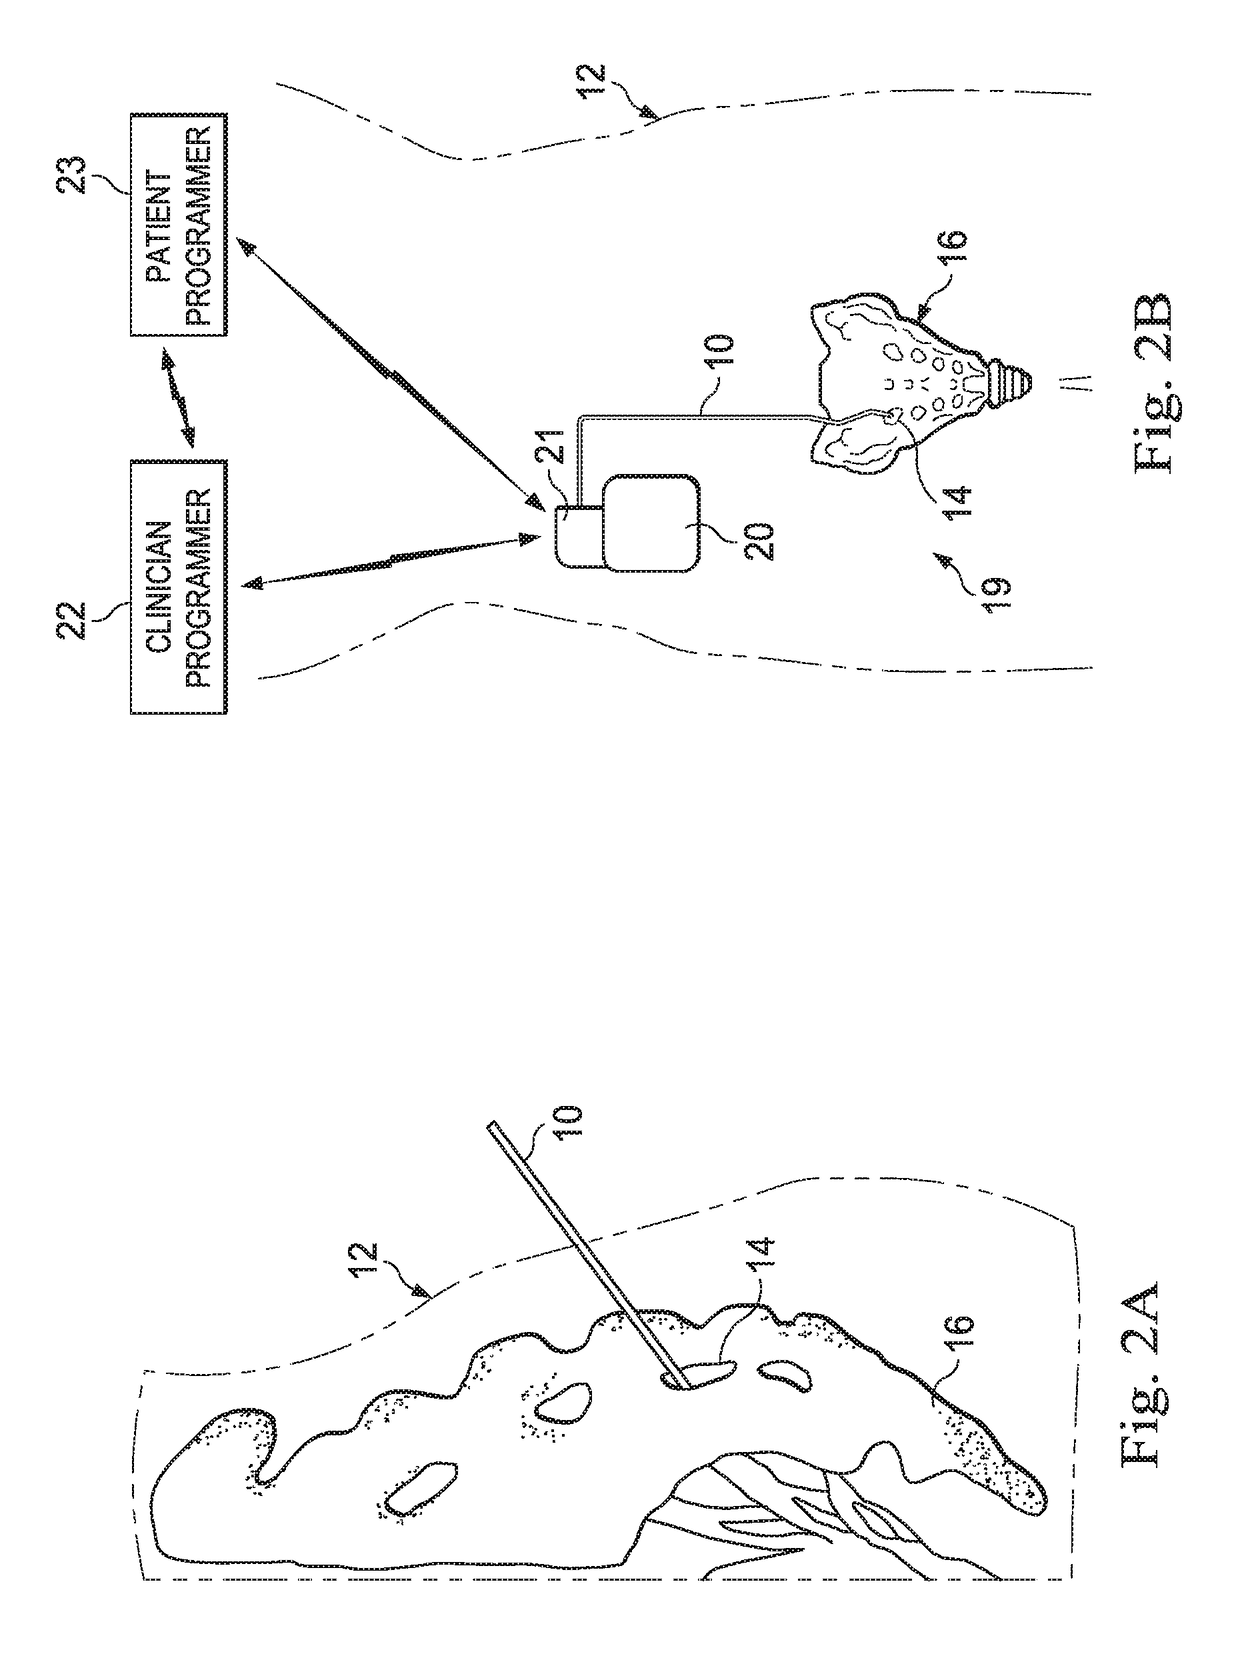 Systems, methods, and devices for evaluating lead placement based on patient physiological responses